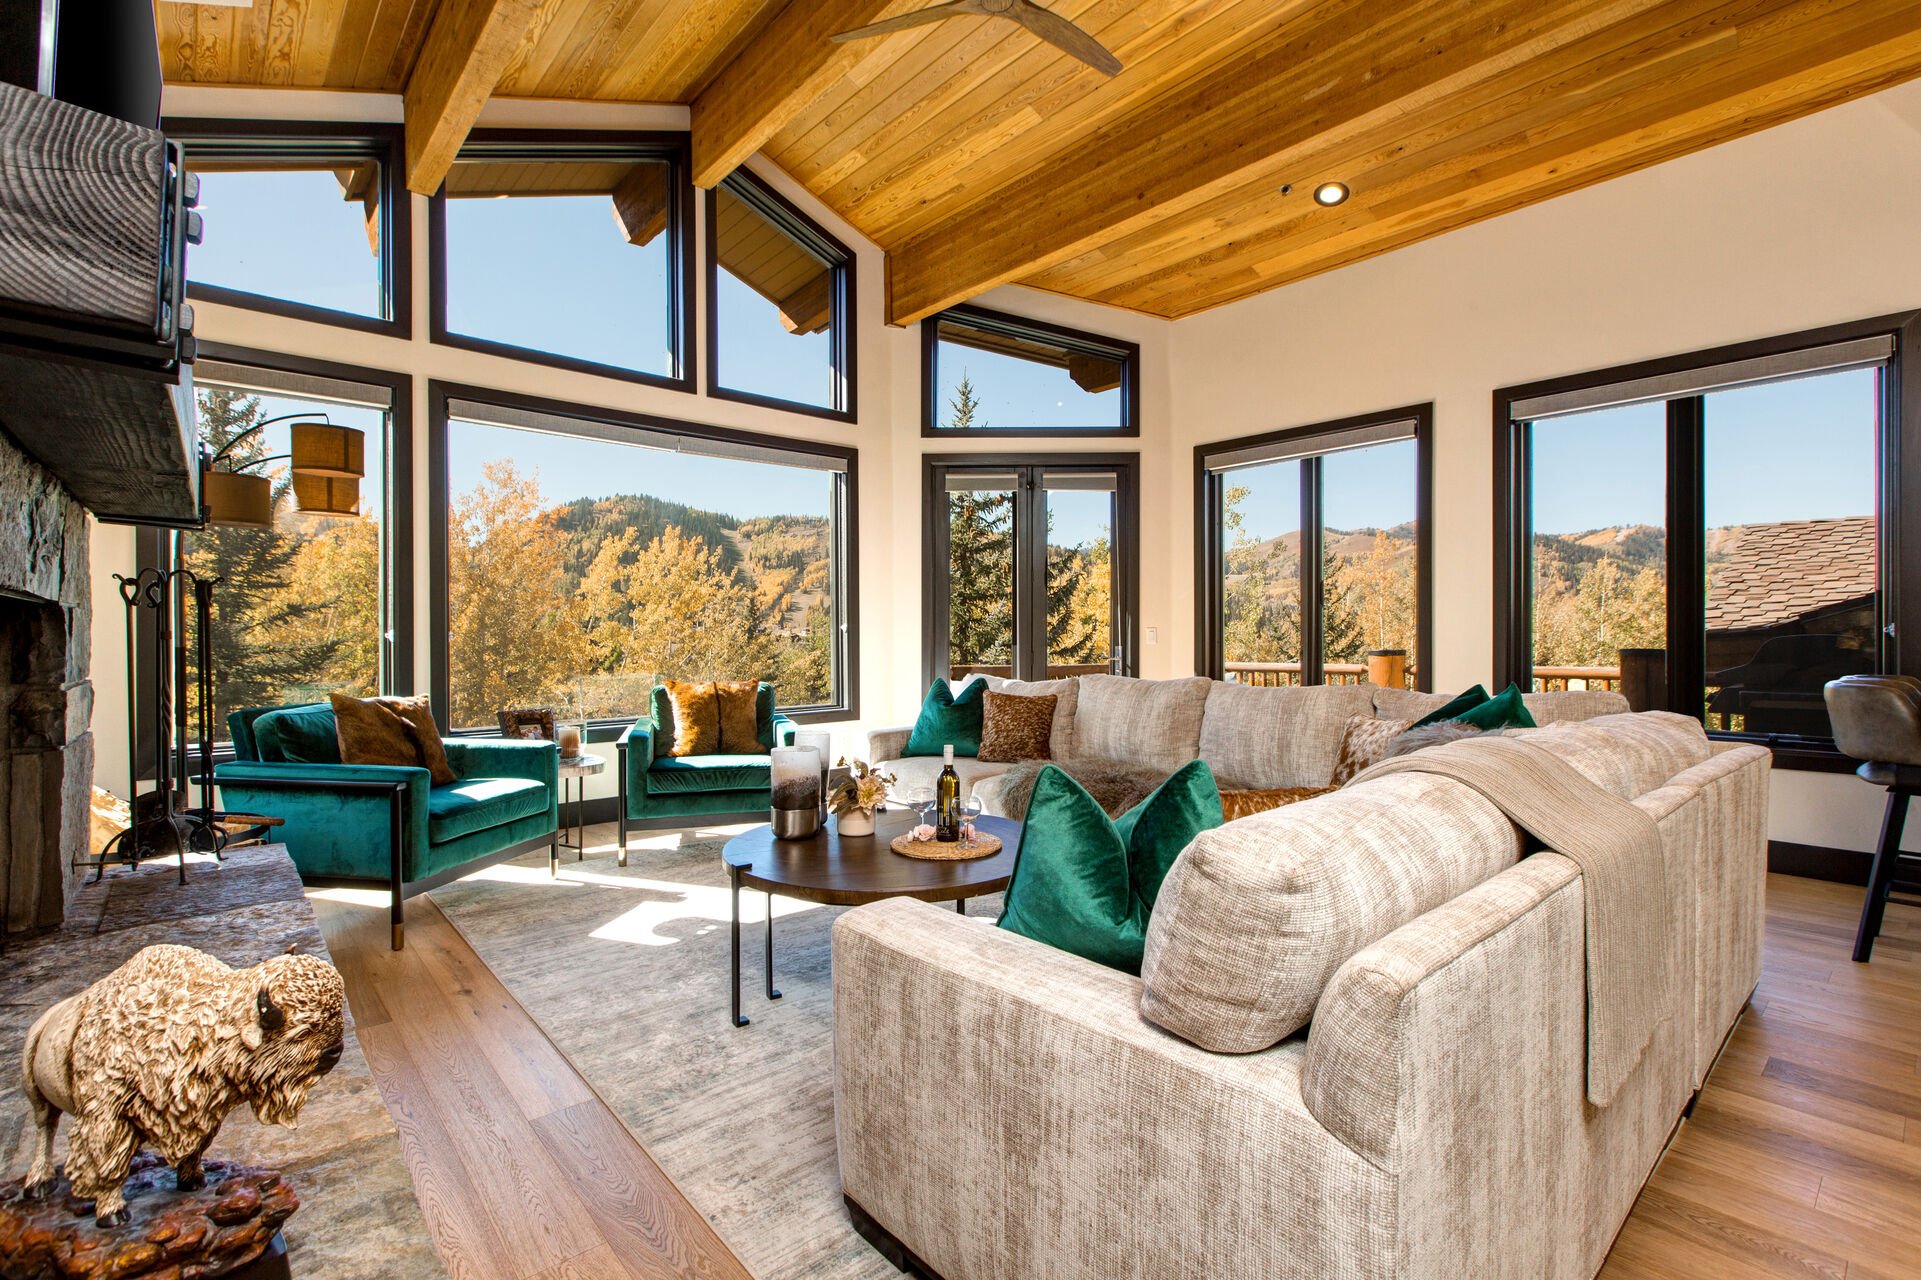 Living Room with plush sectional, gorgeous arm chairs, cozy gas fireplace, vaulted ceilings, floor to ceiling windows, Smart TV, and private deck access